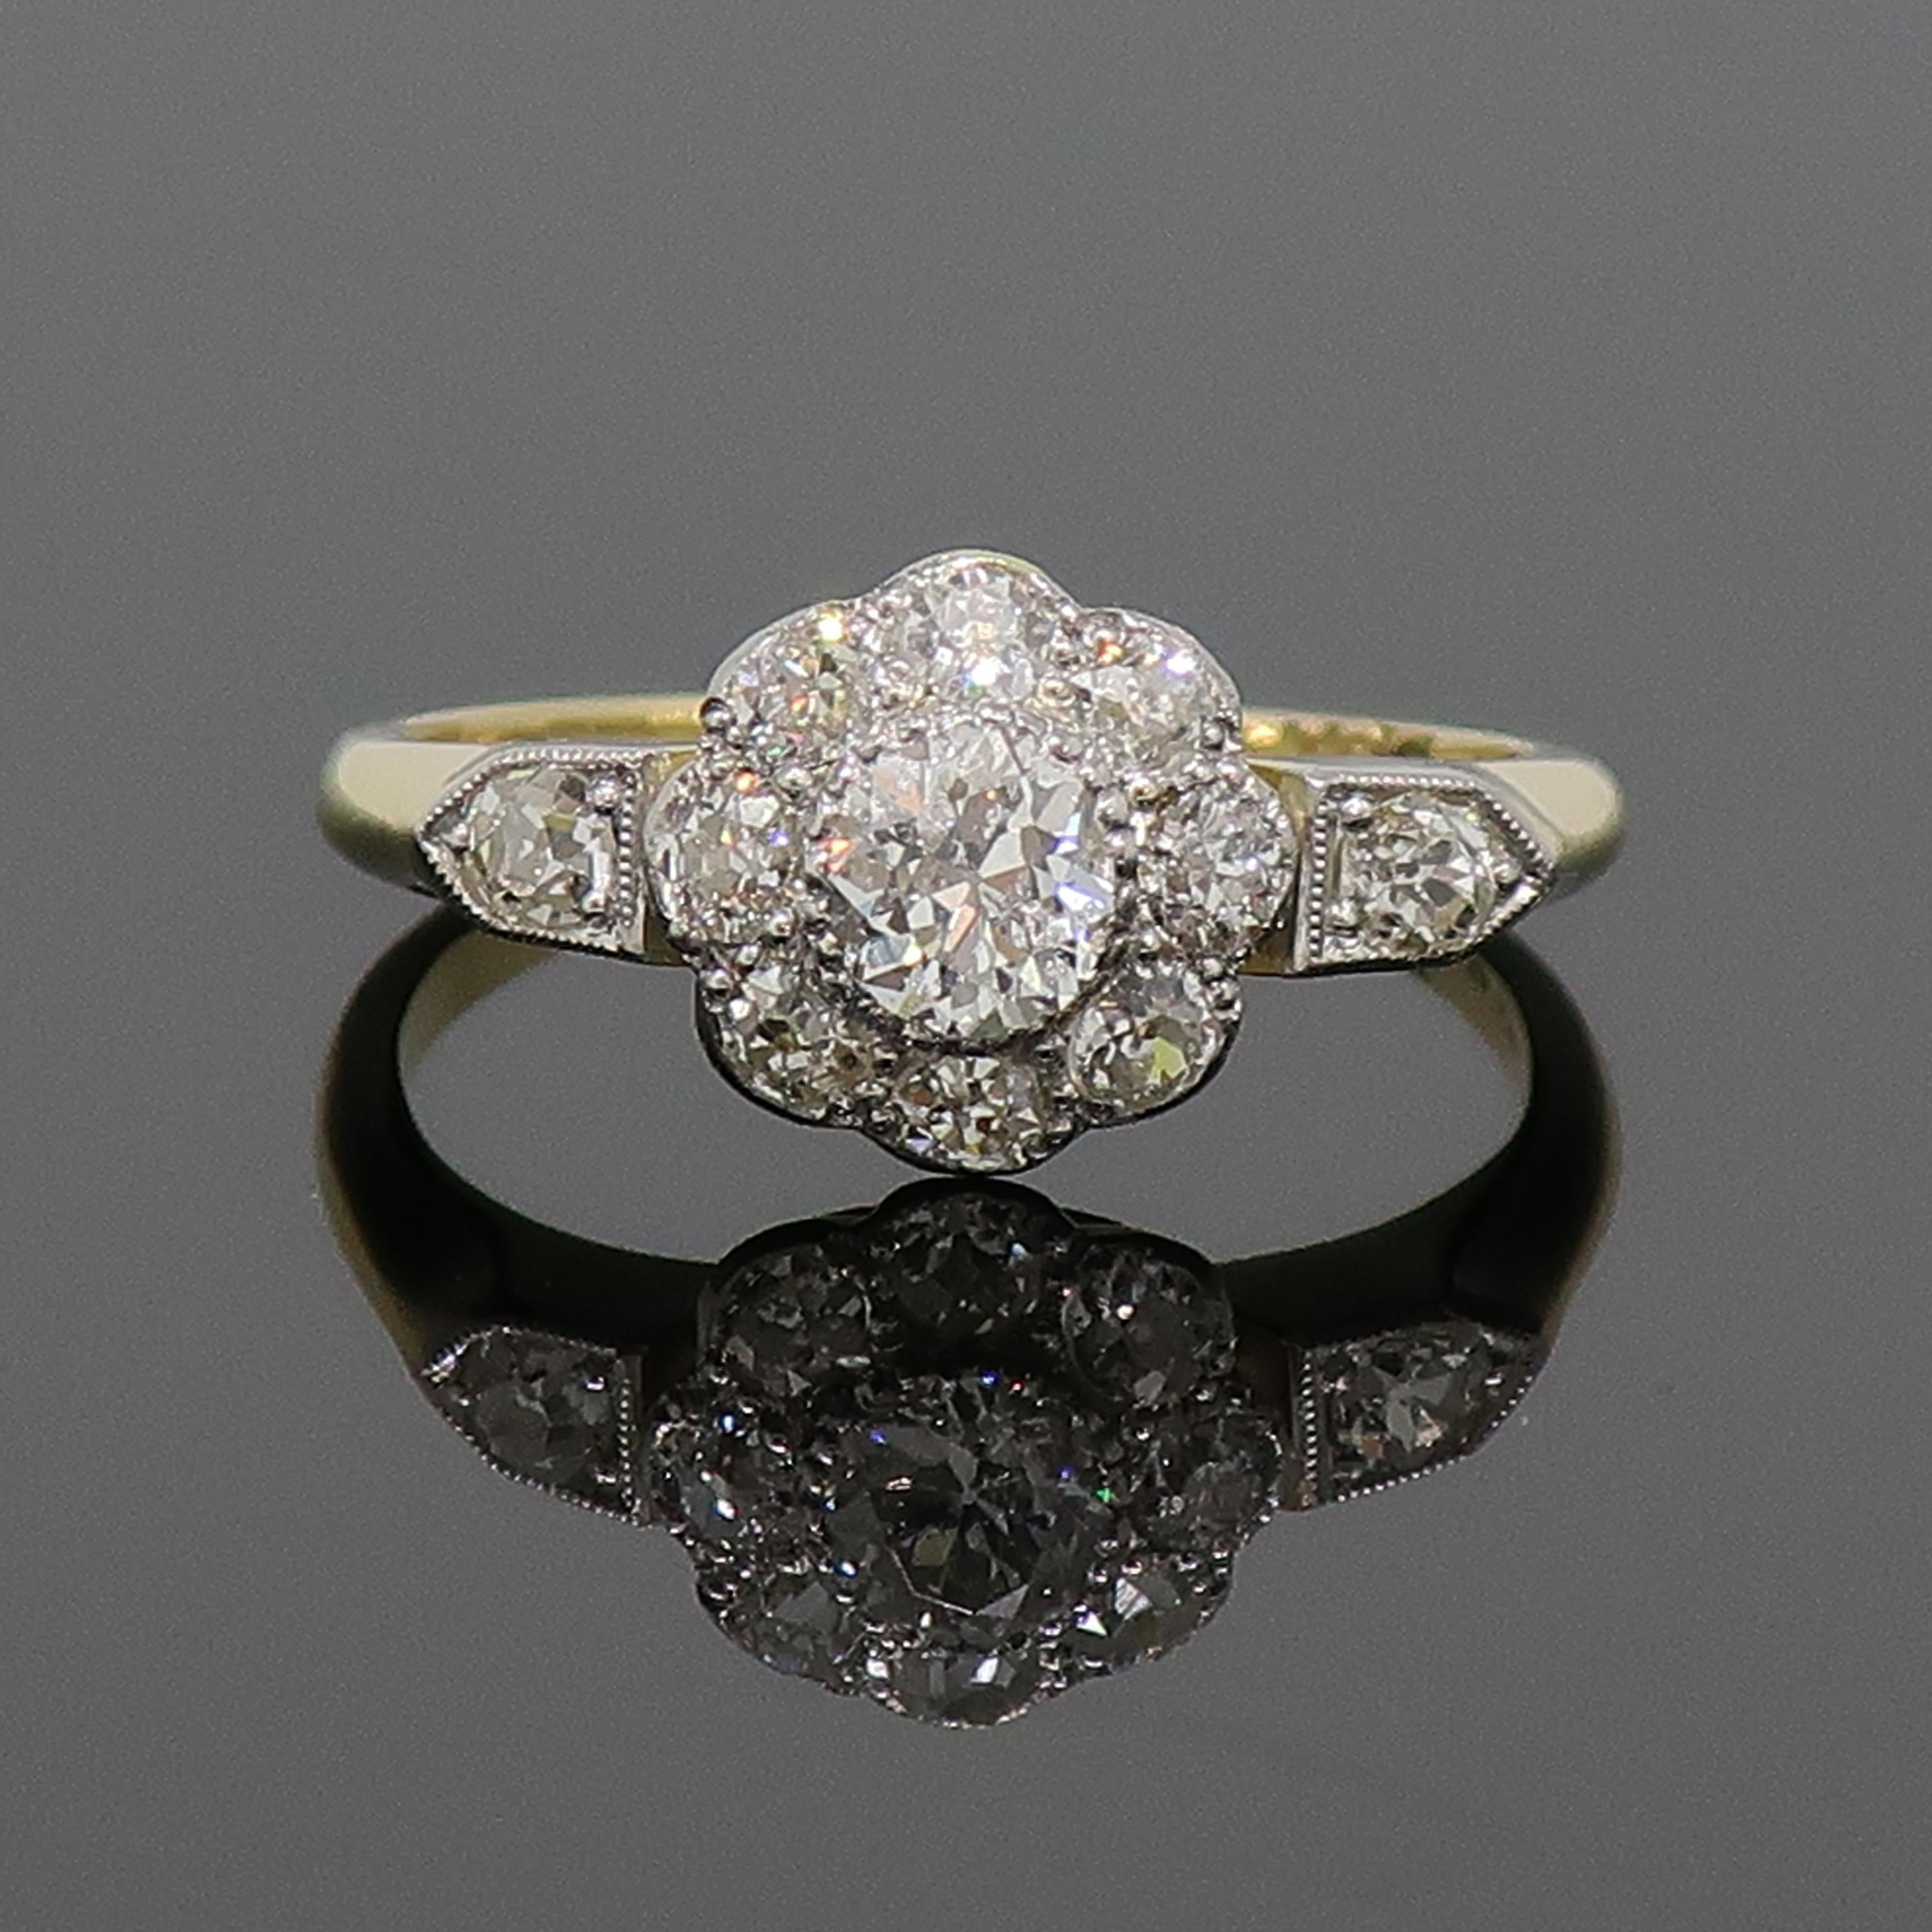 Old Cut Diamond Daisy Cluster Ring 18 Karat Yellow & White Gold

Edwardian classic daisy diamond cluster. Nine stone old cut diamond daisy cluster ring. Central white diamond is larger than the eight outer diamonds, with a further diamond on top of